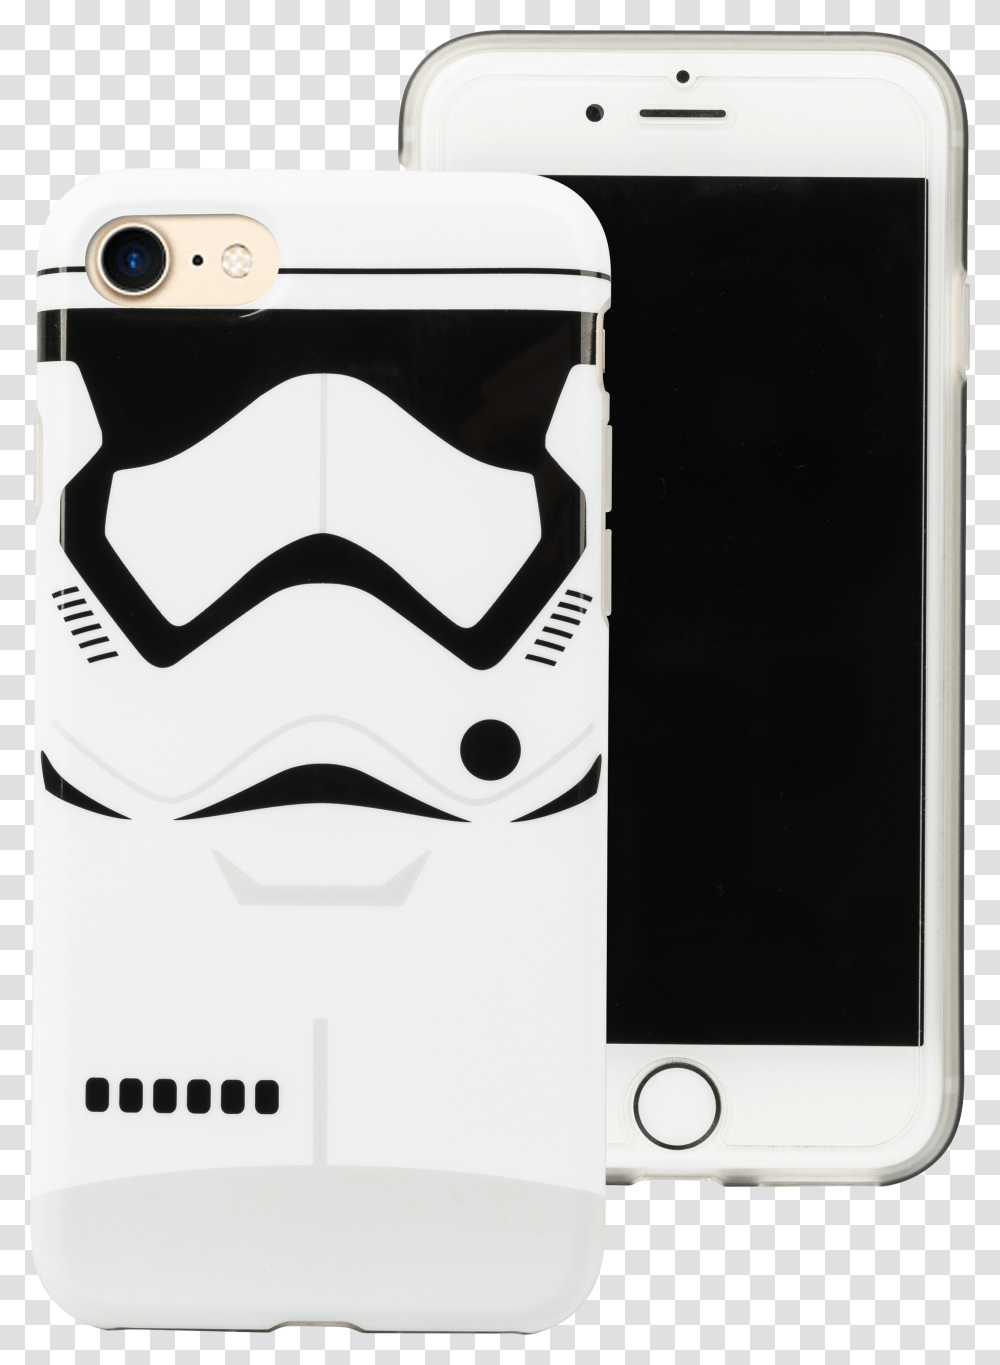 Star Wars Tfa Stormtrooper Iphone 7 Cover Image Stormtrooper Iphone 6 Case, Mobile Phone, Electronics, Cell Phone, Sunglasses Transparent Png